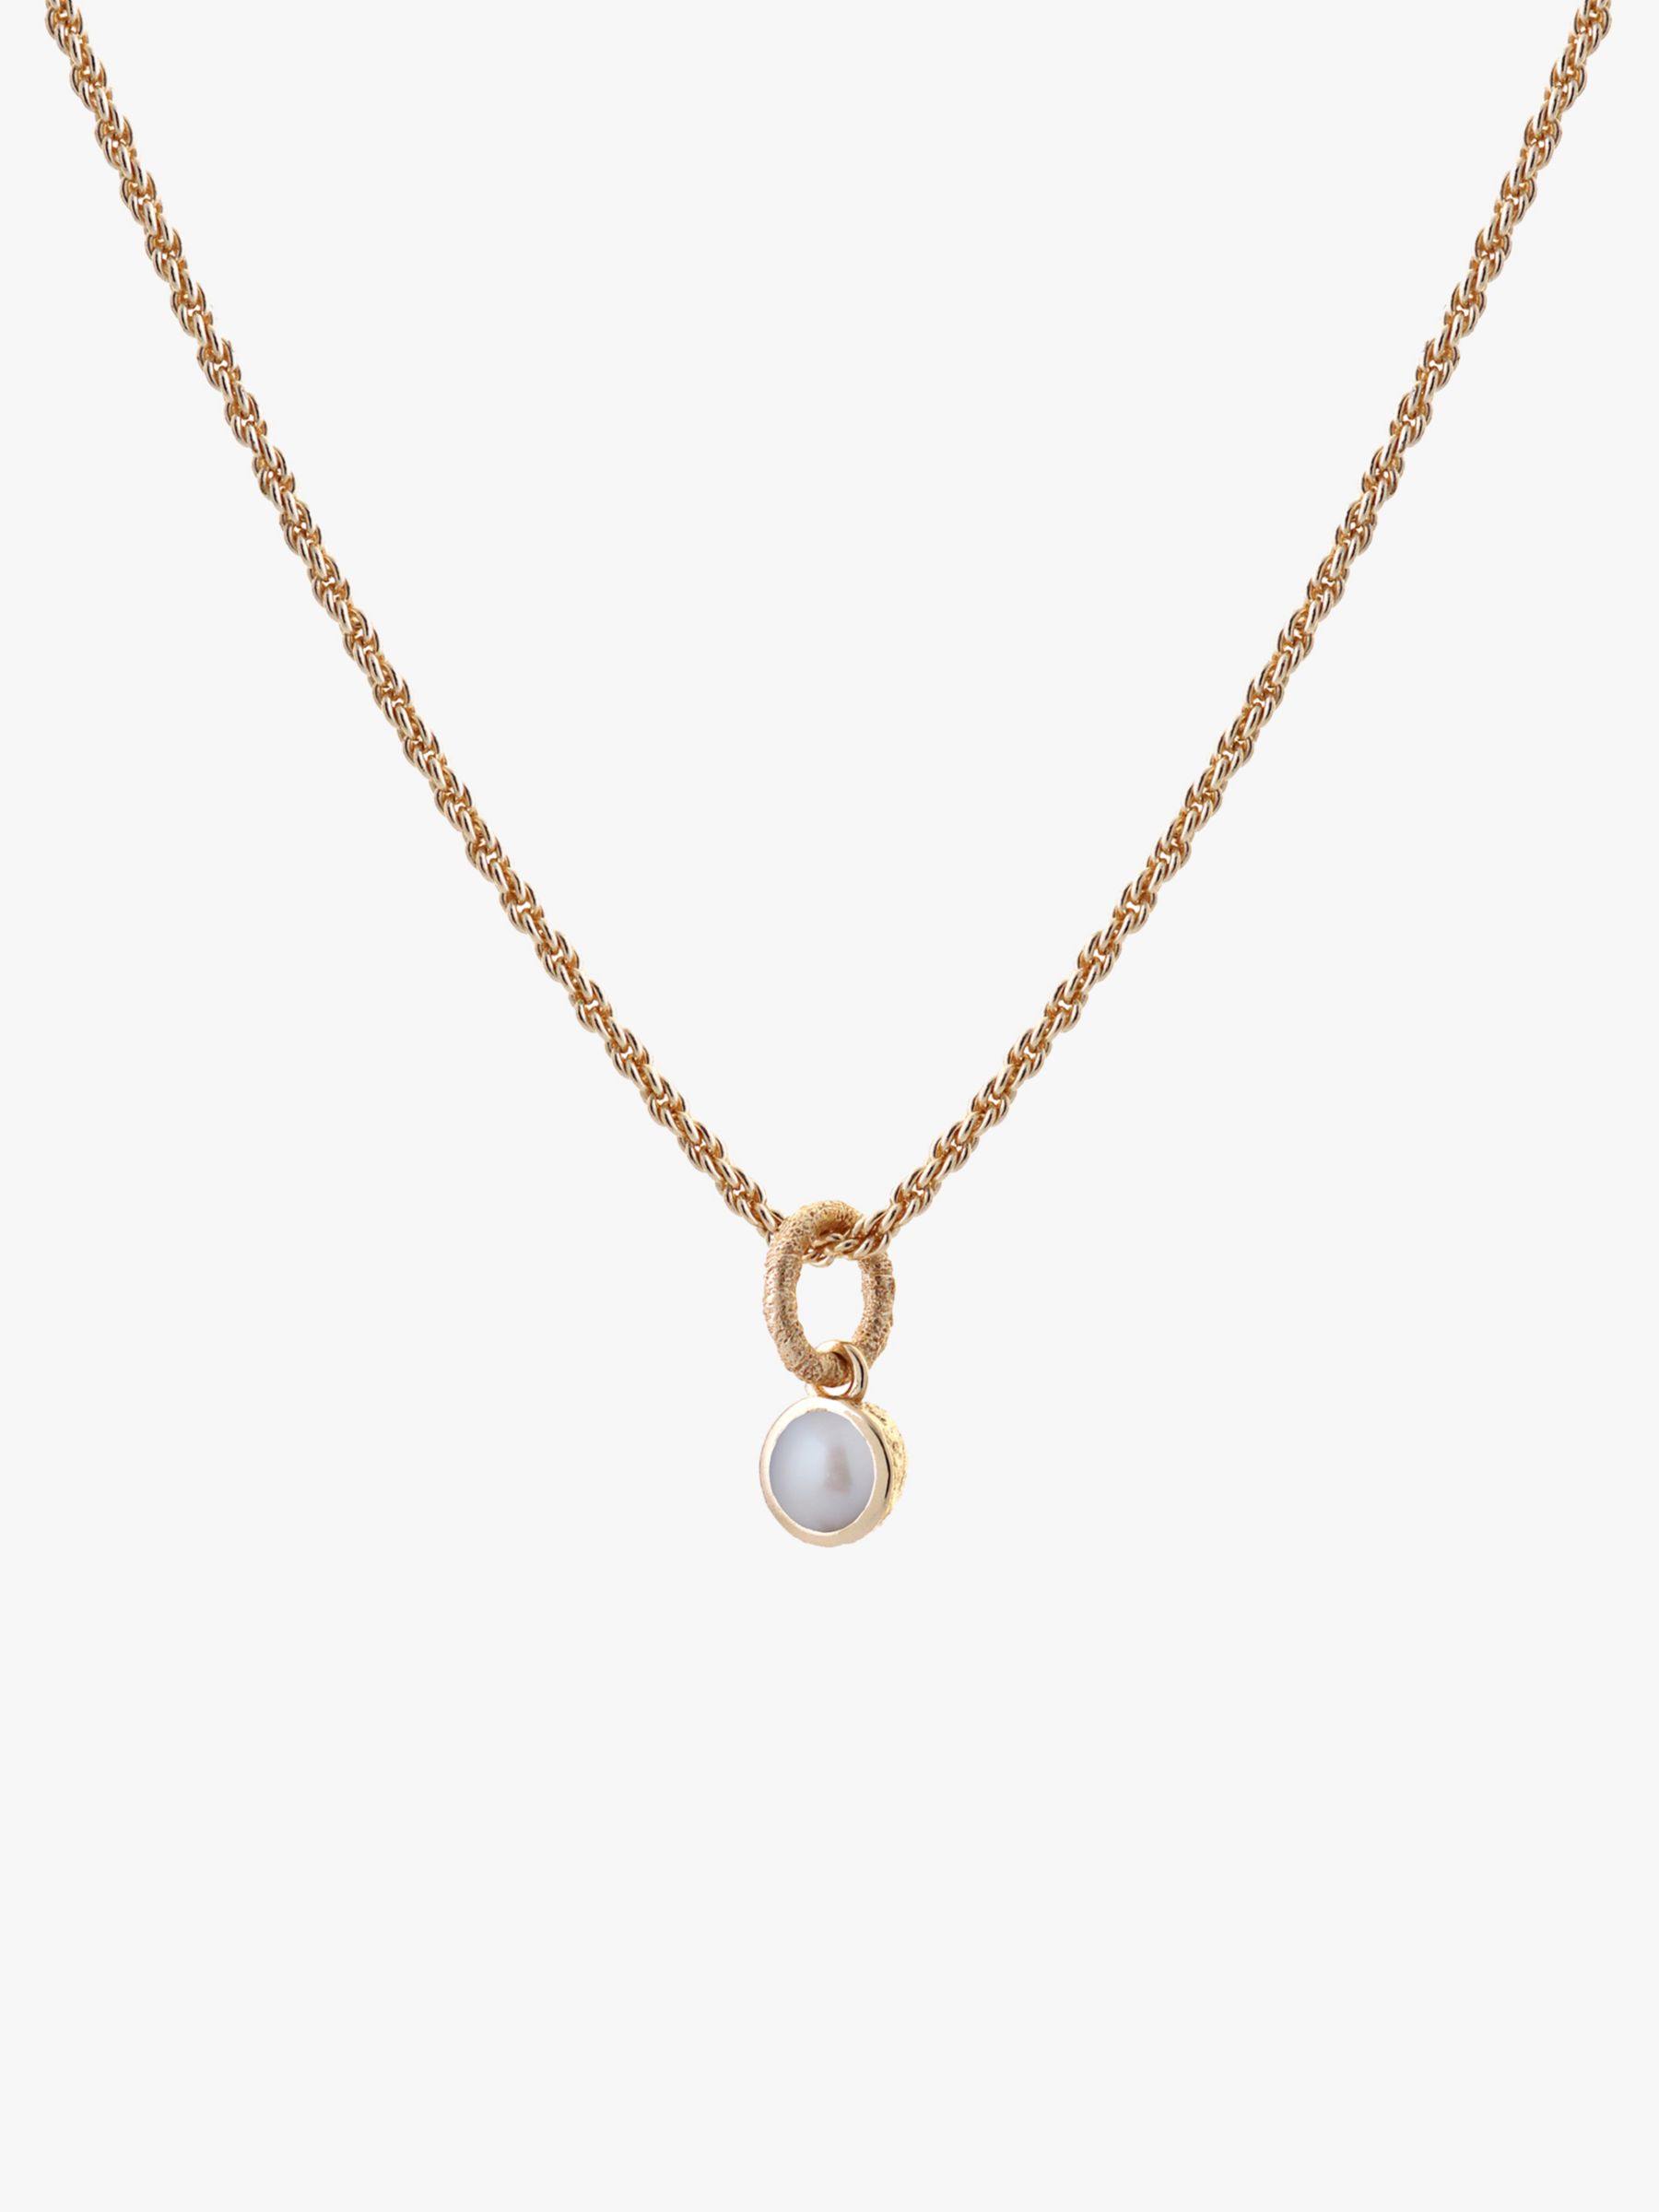 Tutti & Co June Birthstone Necklace, Pearl, Gold at John Lewis & Partners